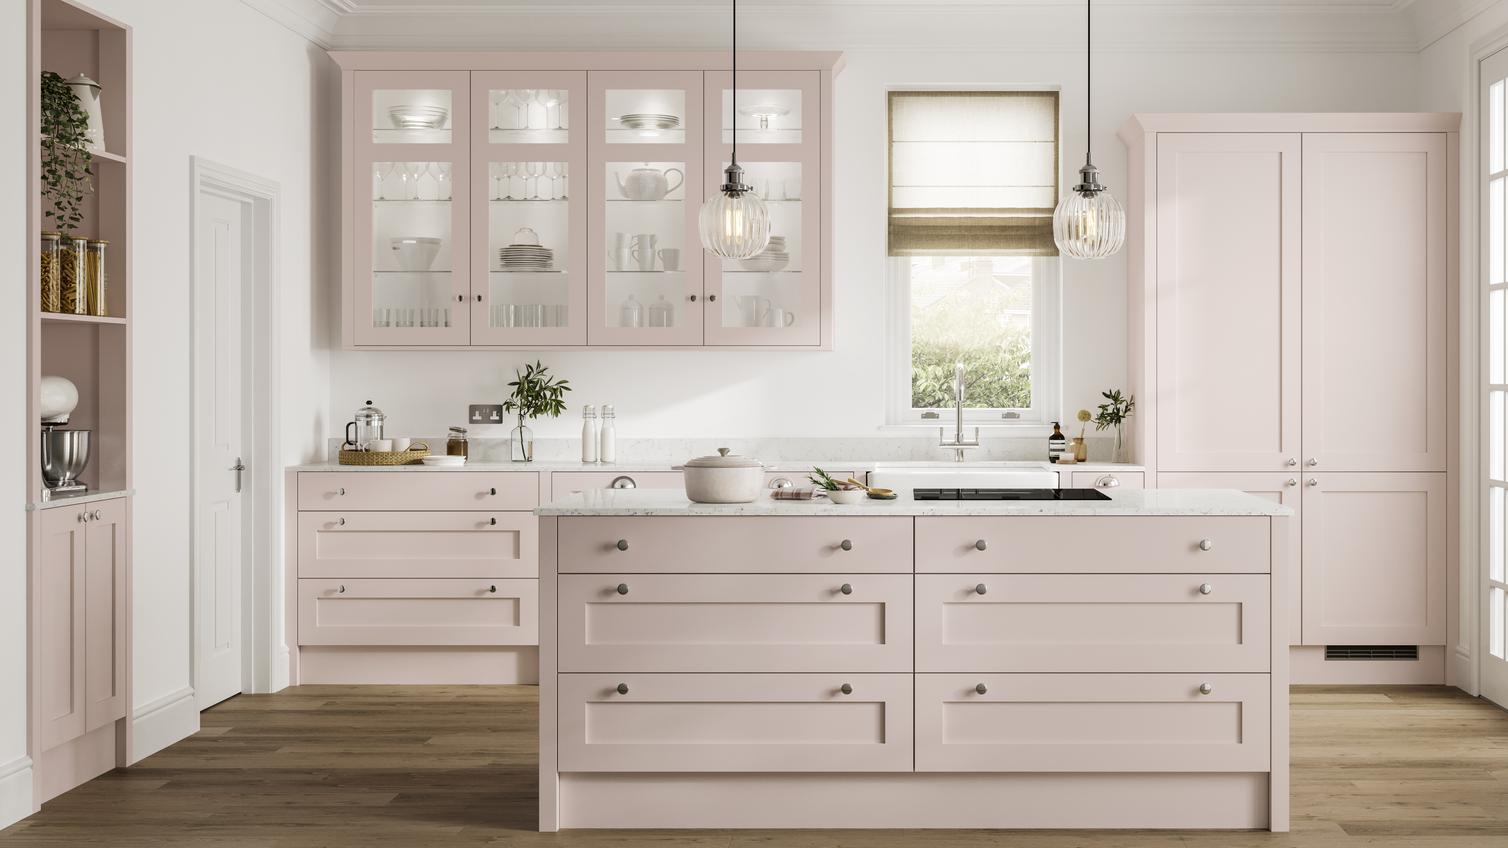 Blossom-toned, pink kitchen with shaker doors and an island layout. It has warm, oak-effect flooring and white worktops. 